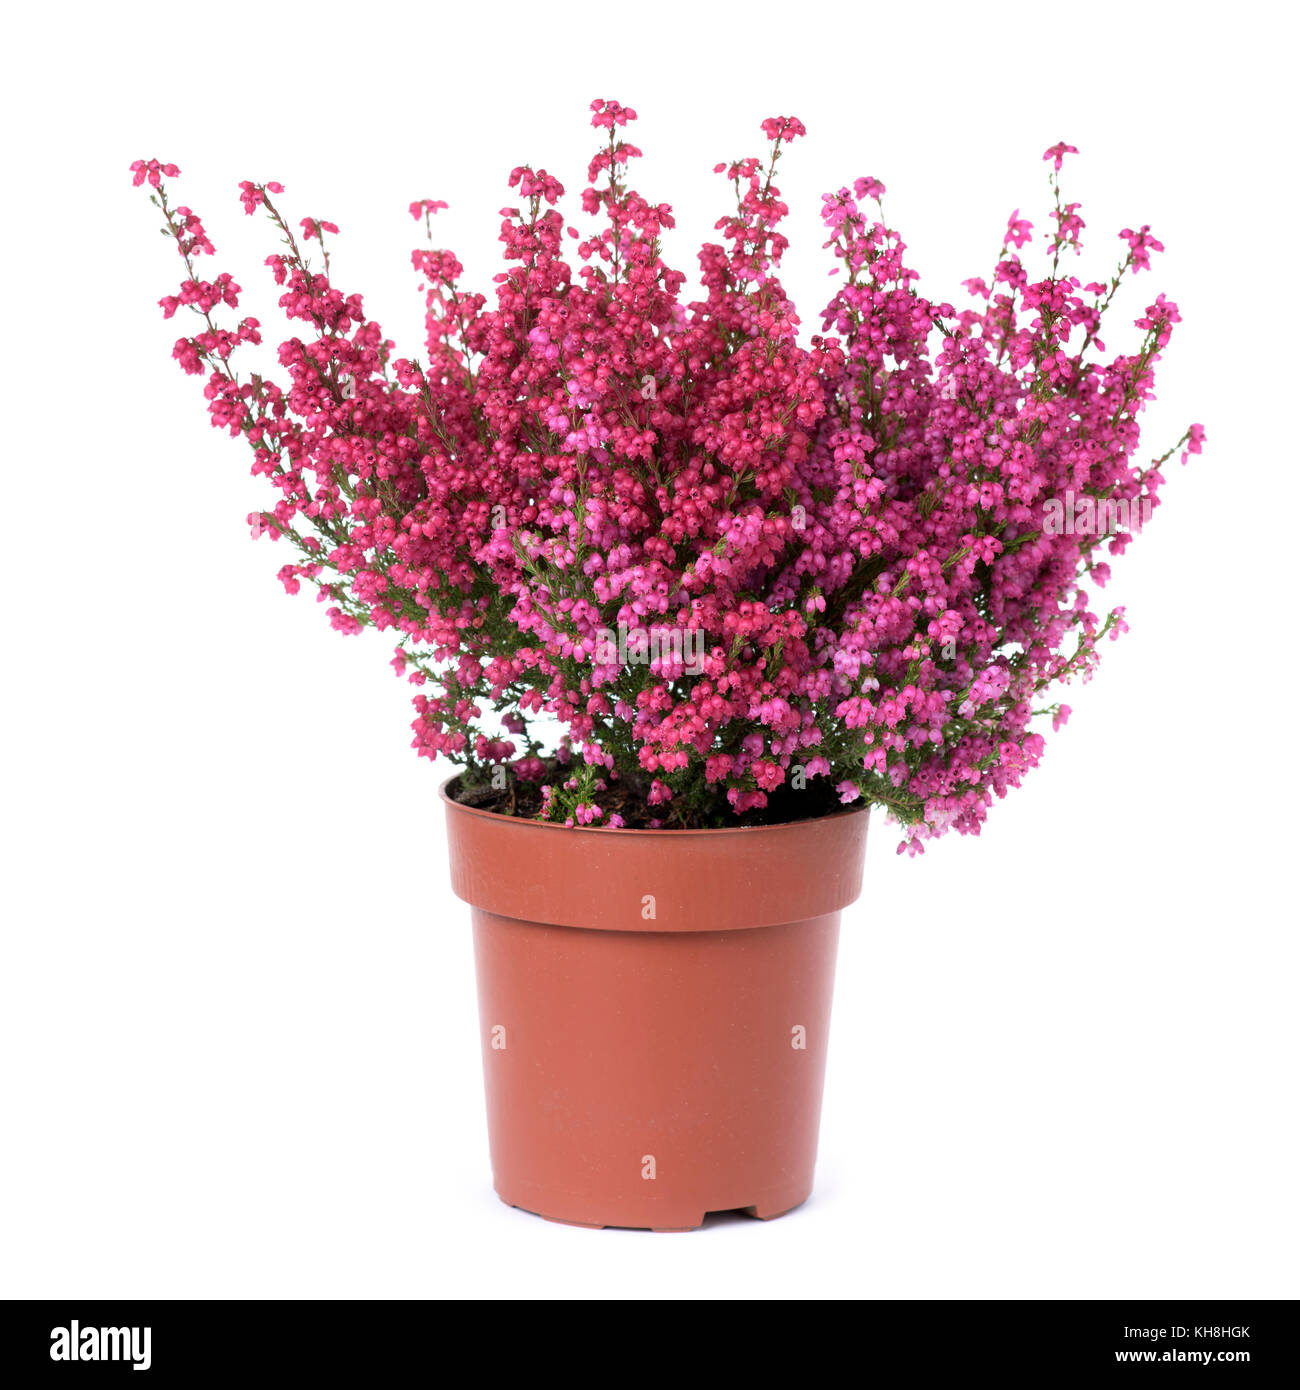 a bell heather plant with pink flowers in a brown plastic plant pot, on a white background Stock Photo